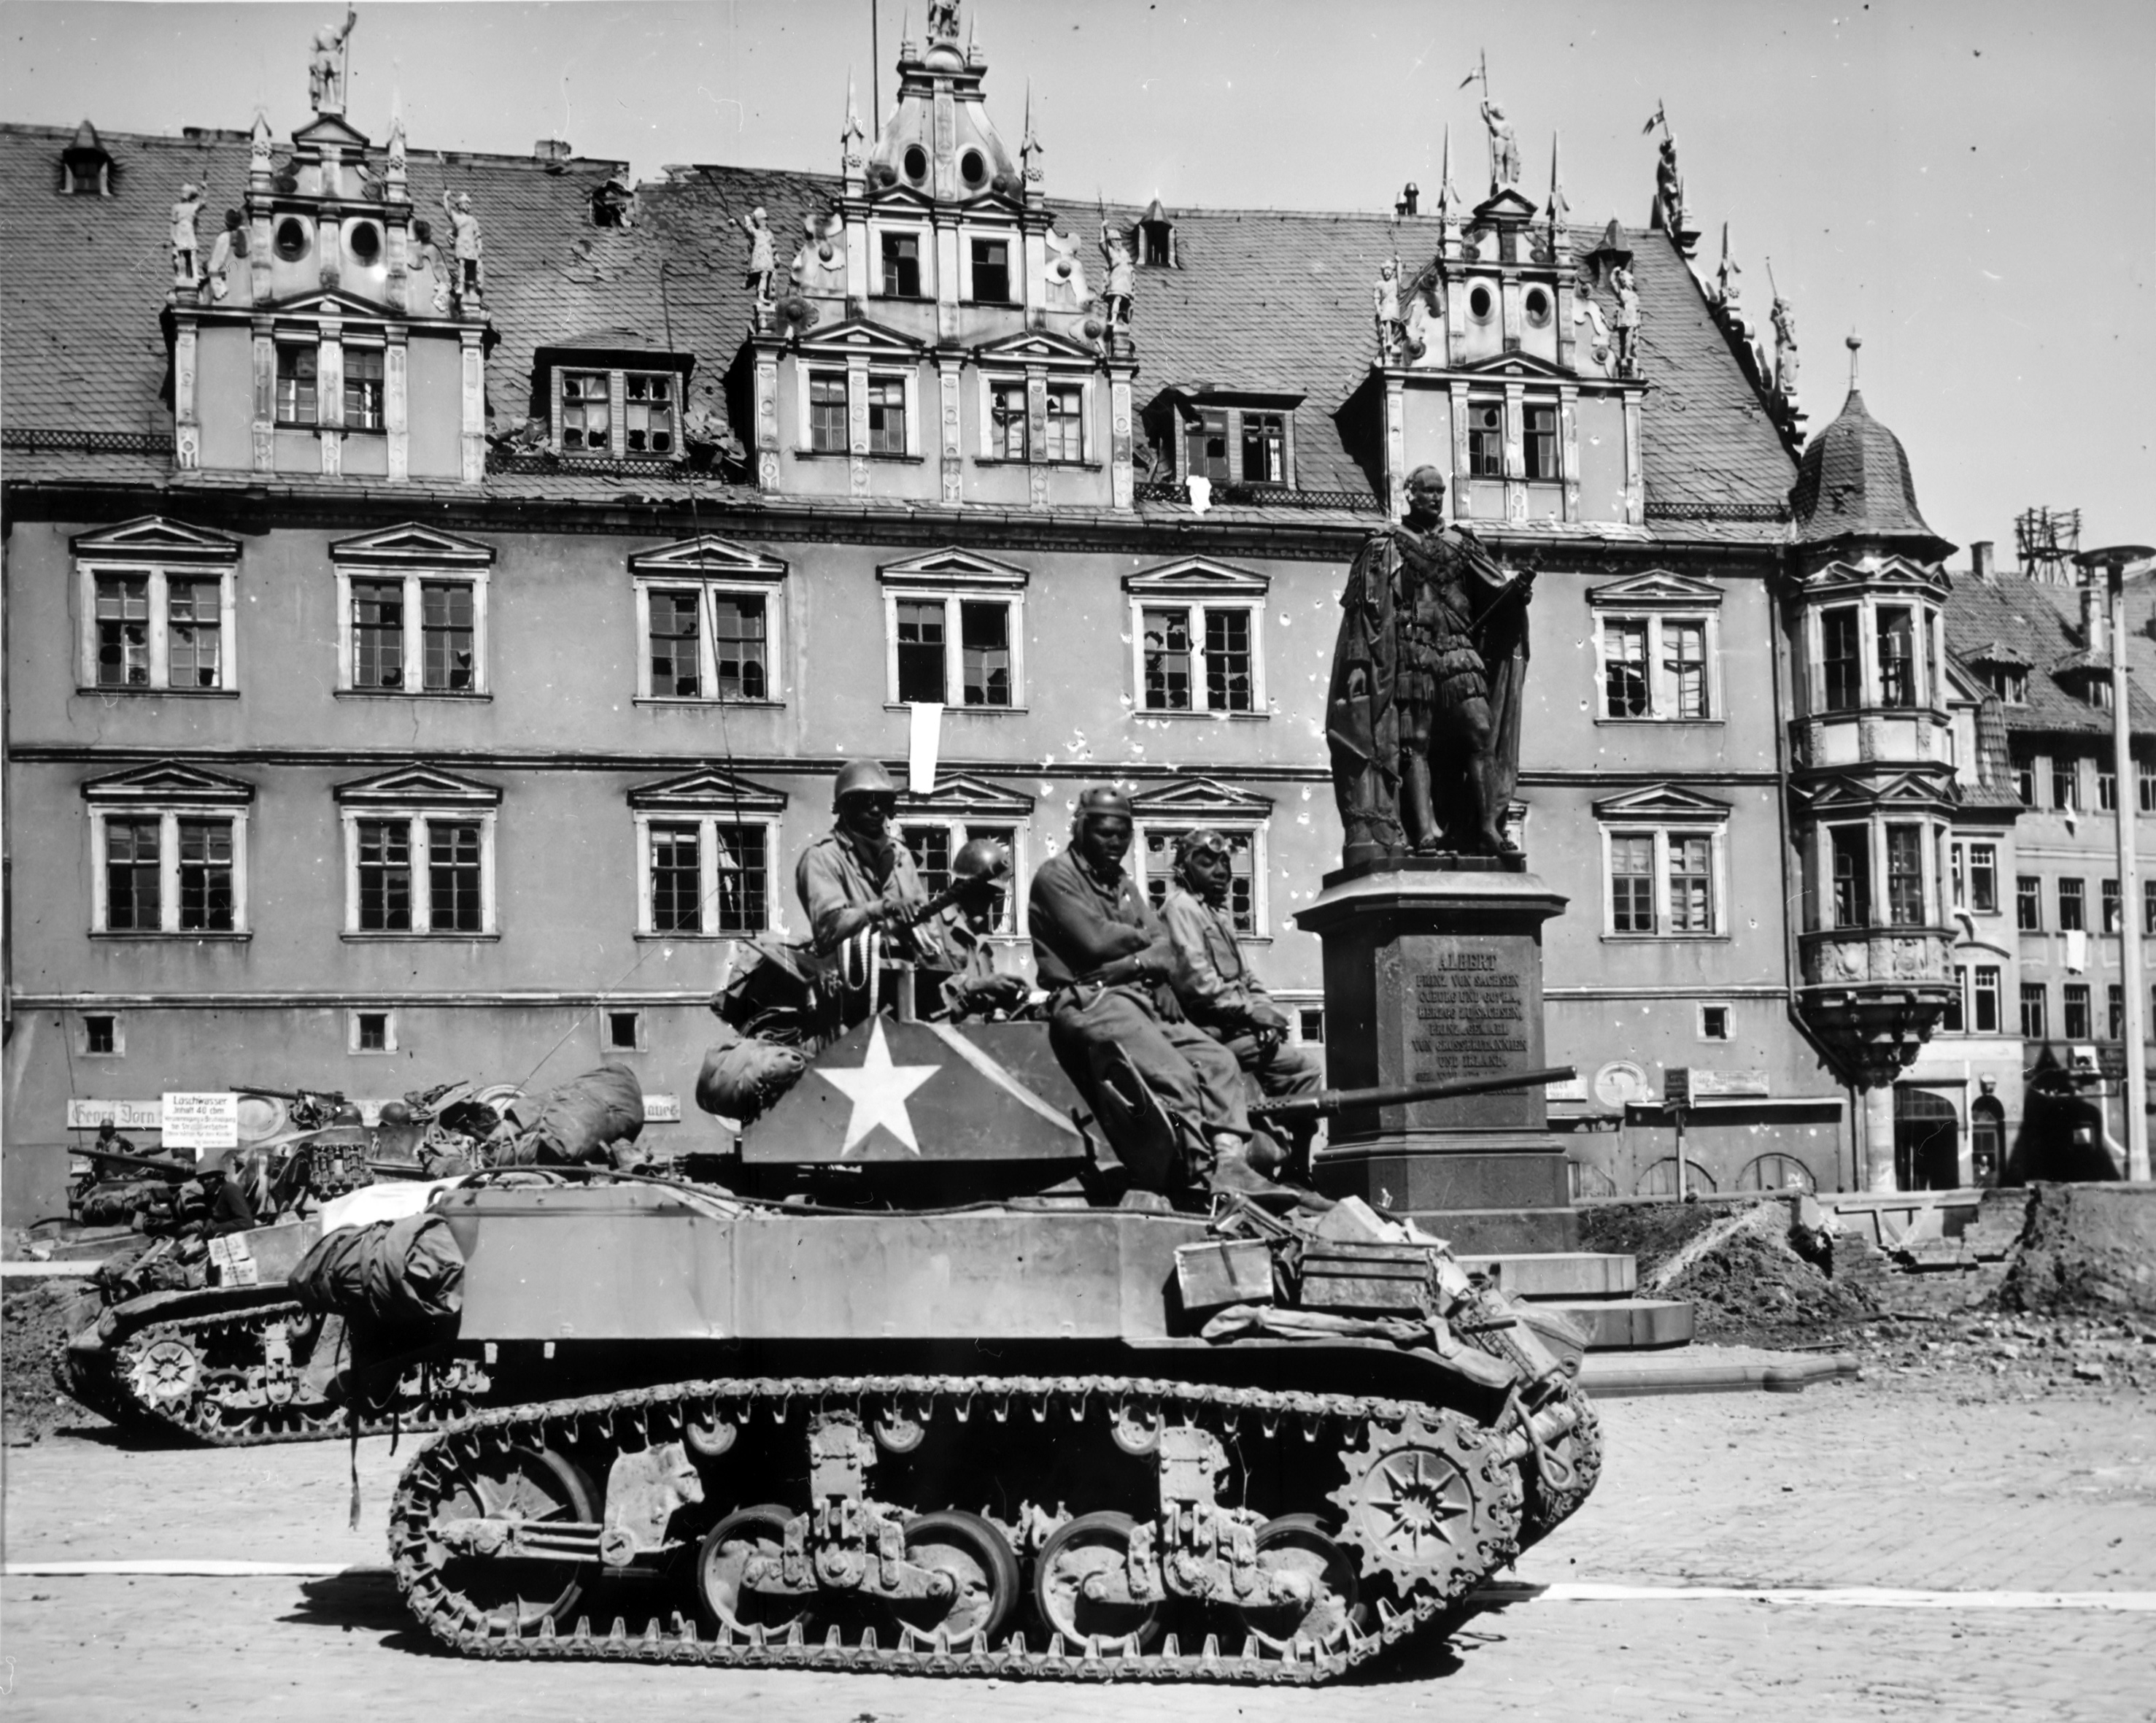 6th armoured 69th tank battion location battle of bulge